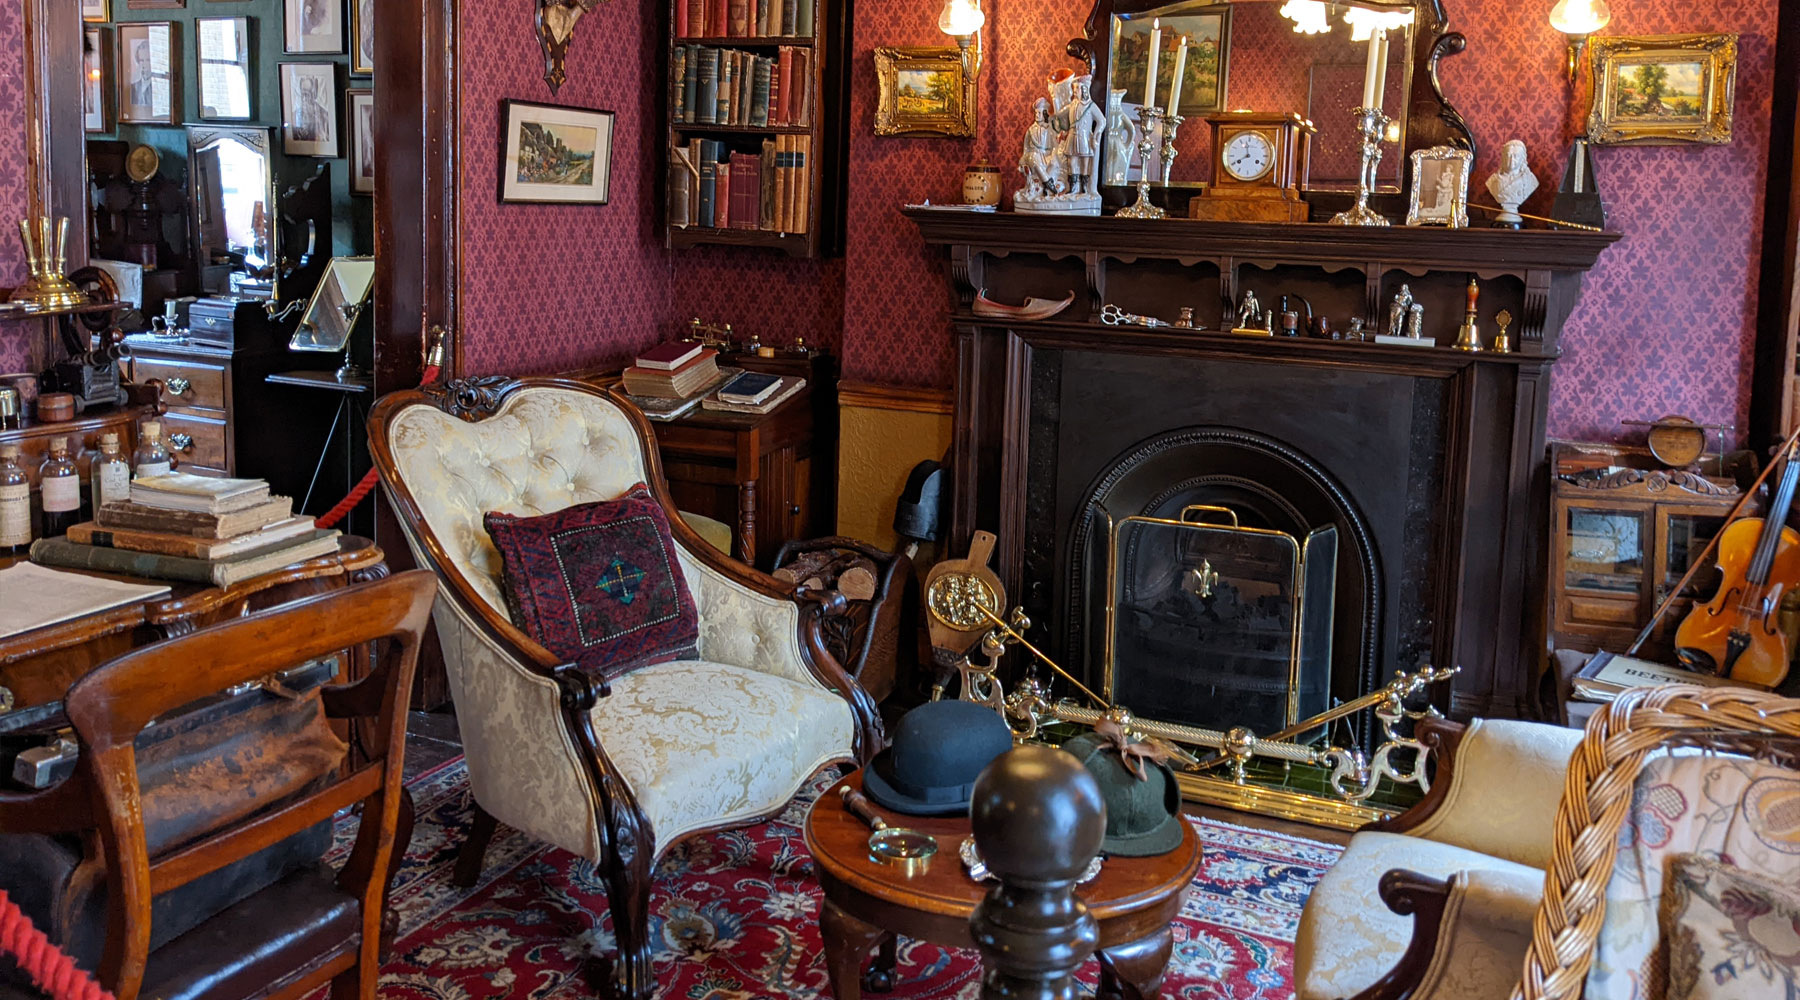 A visit to the Sherlock Holmes museum